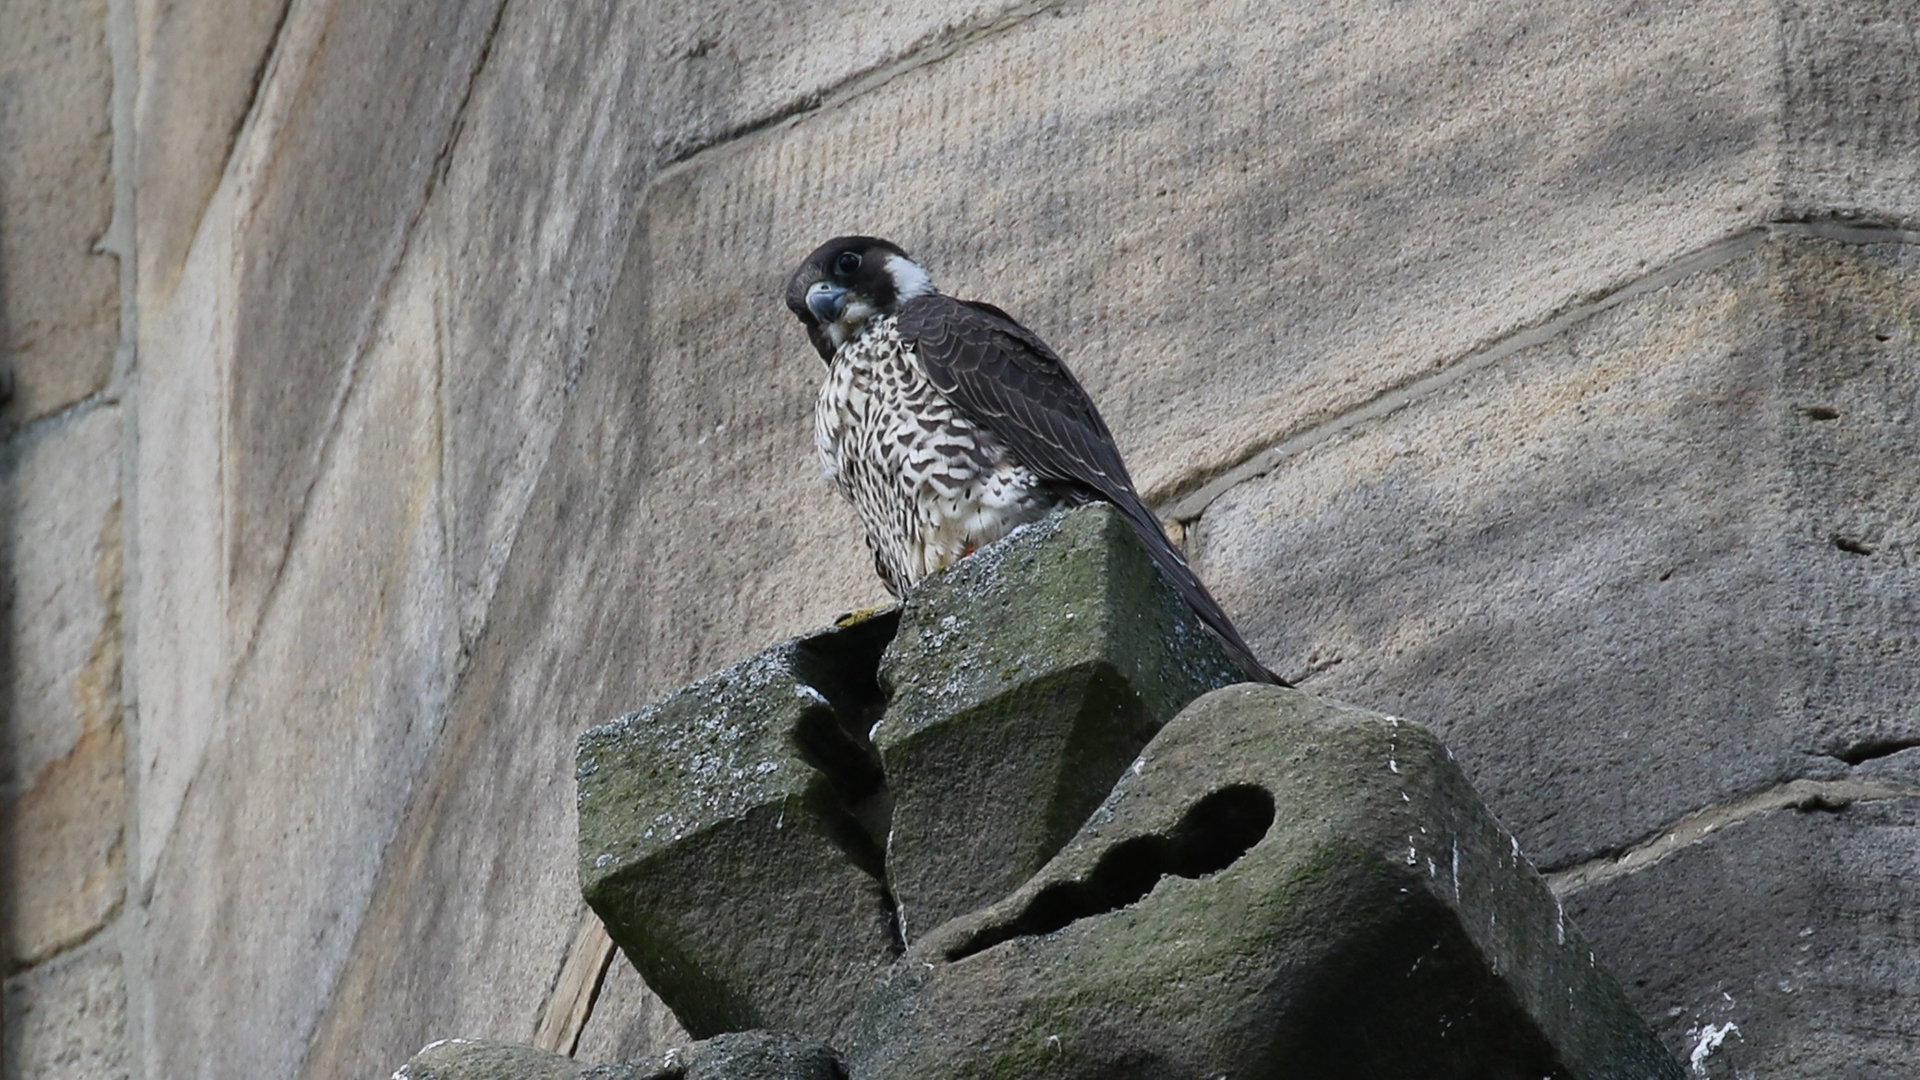 A bird with a black head, dark moustache, a chunky dark beak and a finely barred cream and brown breast. It is  perched near the edge of a stone protruding out of a rough textured wall in the background.